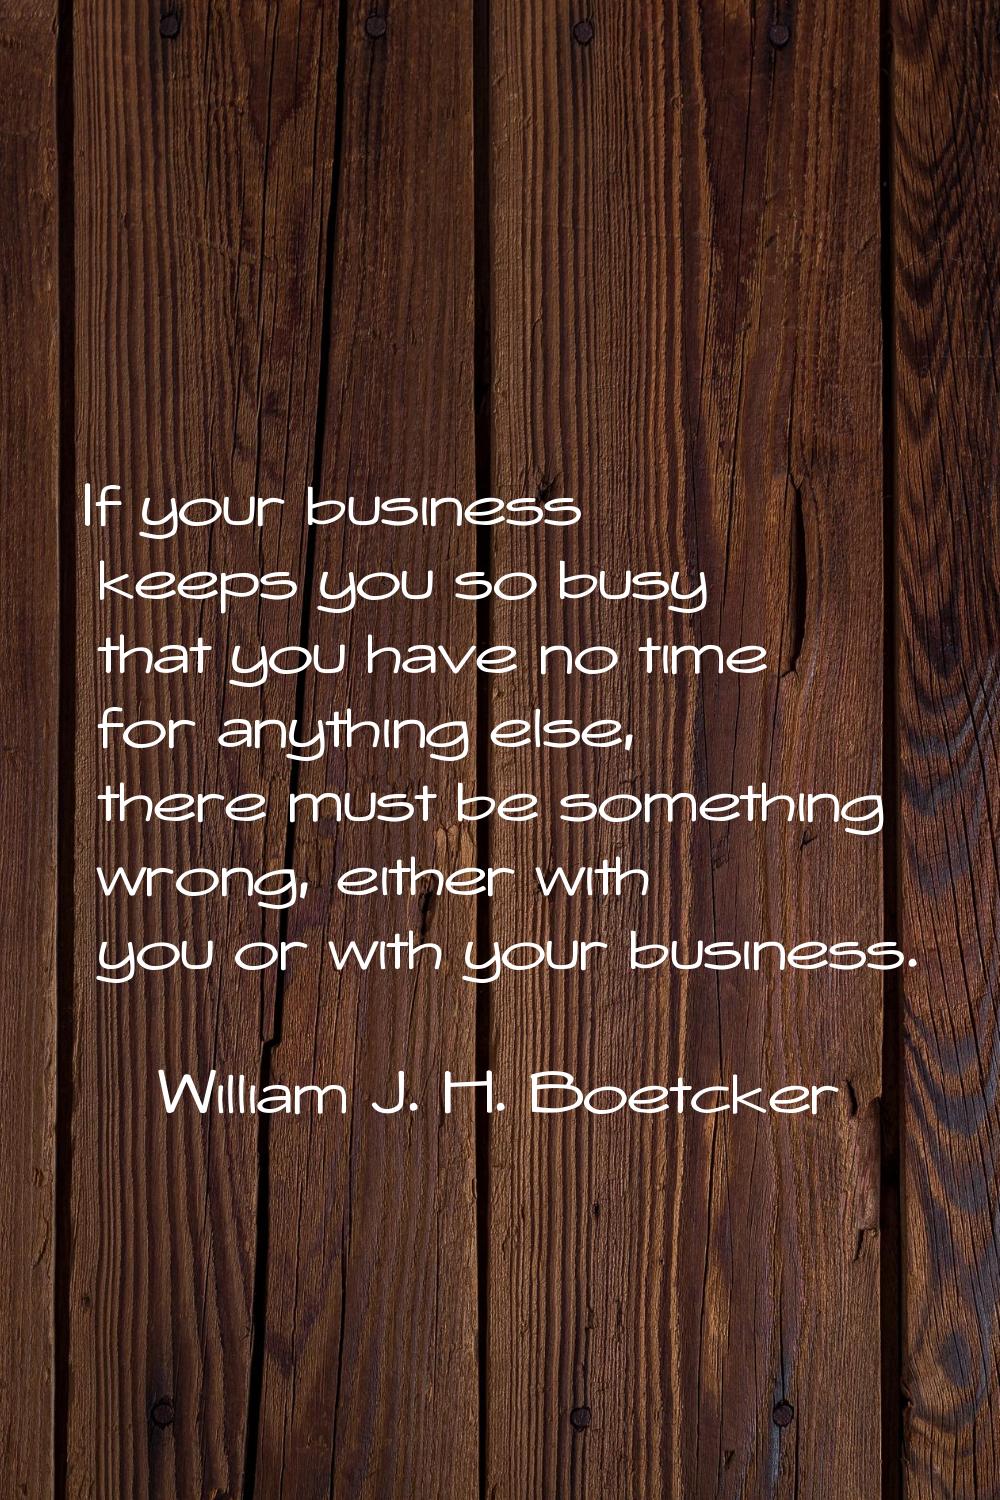 If your business keeps you so busy that you have no time for anything else, there must be something